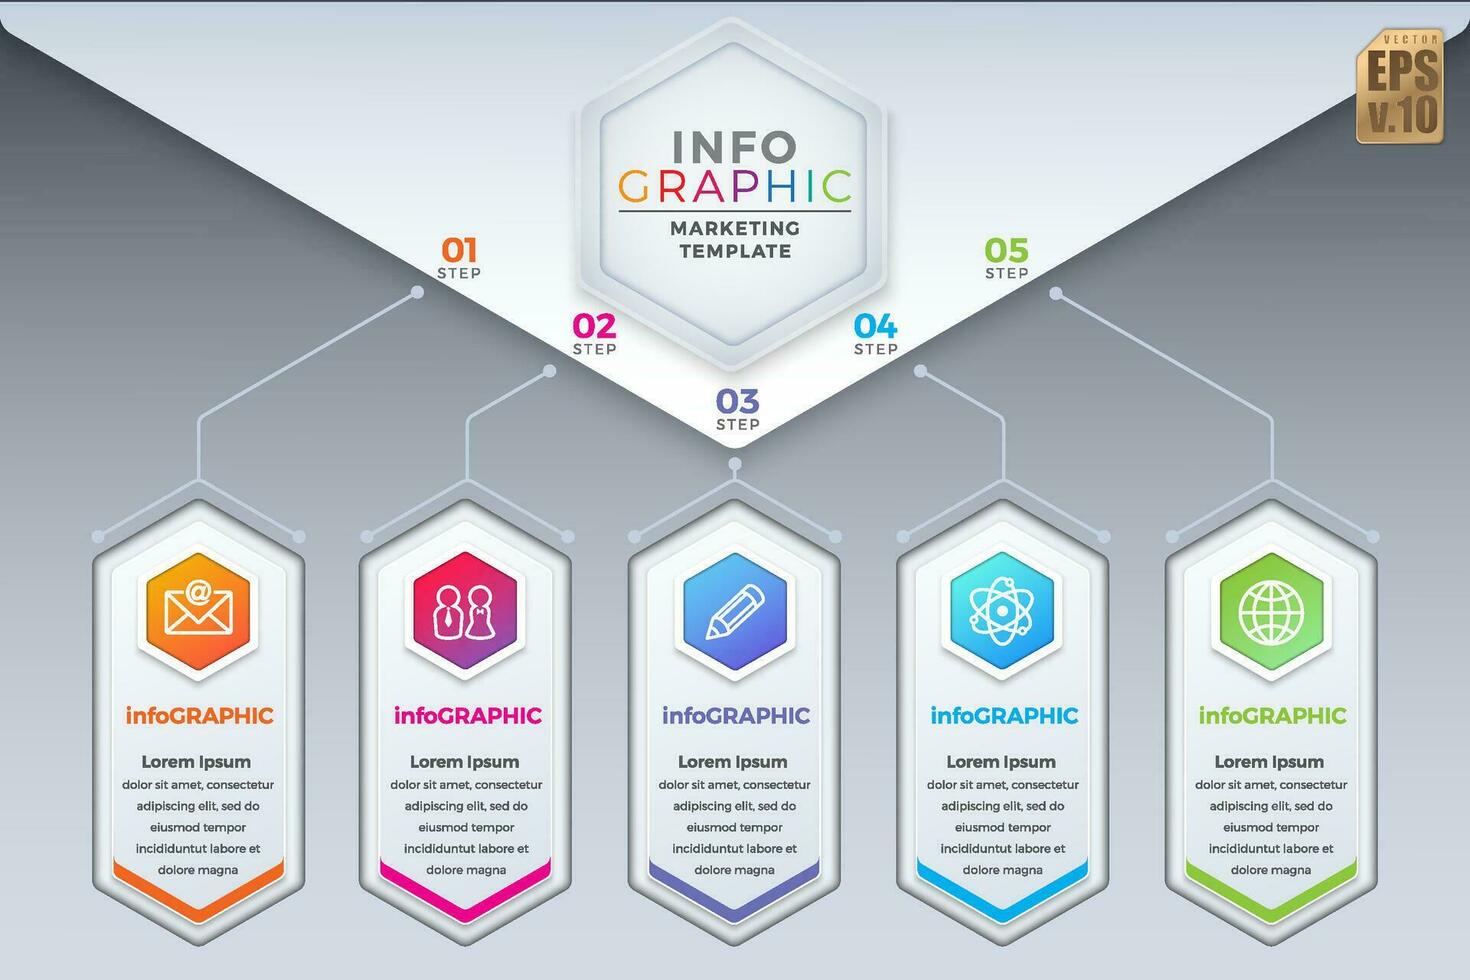 Infographic business design hexagon icons colorful marketing template vector. 5 options or steps on gray background. You can used for Marketing process, workflow presentations layout, flow chart. vector